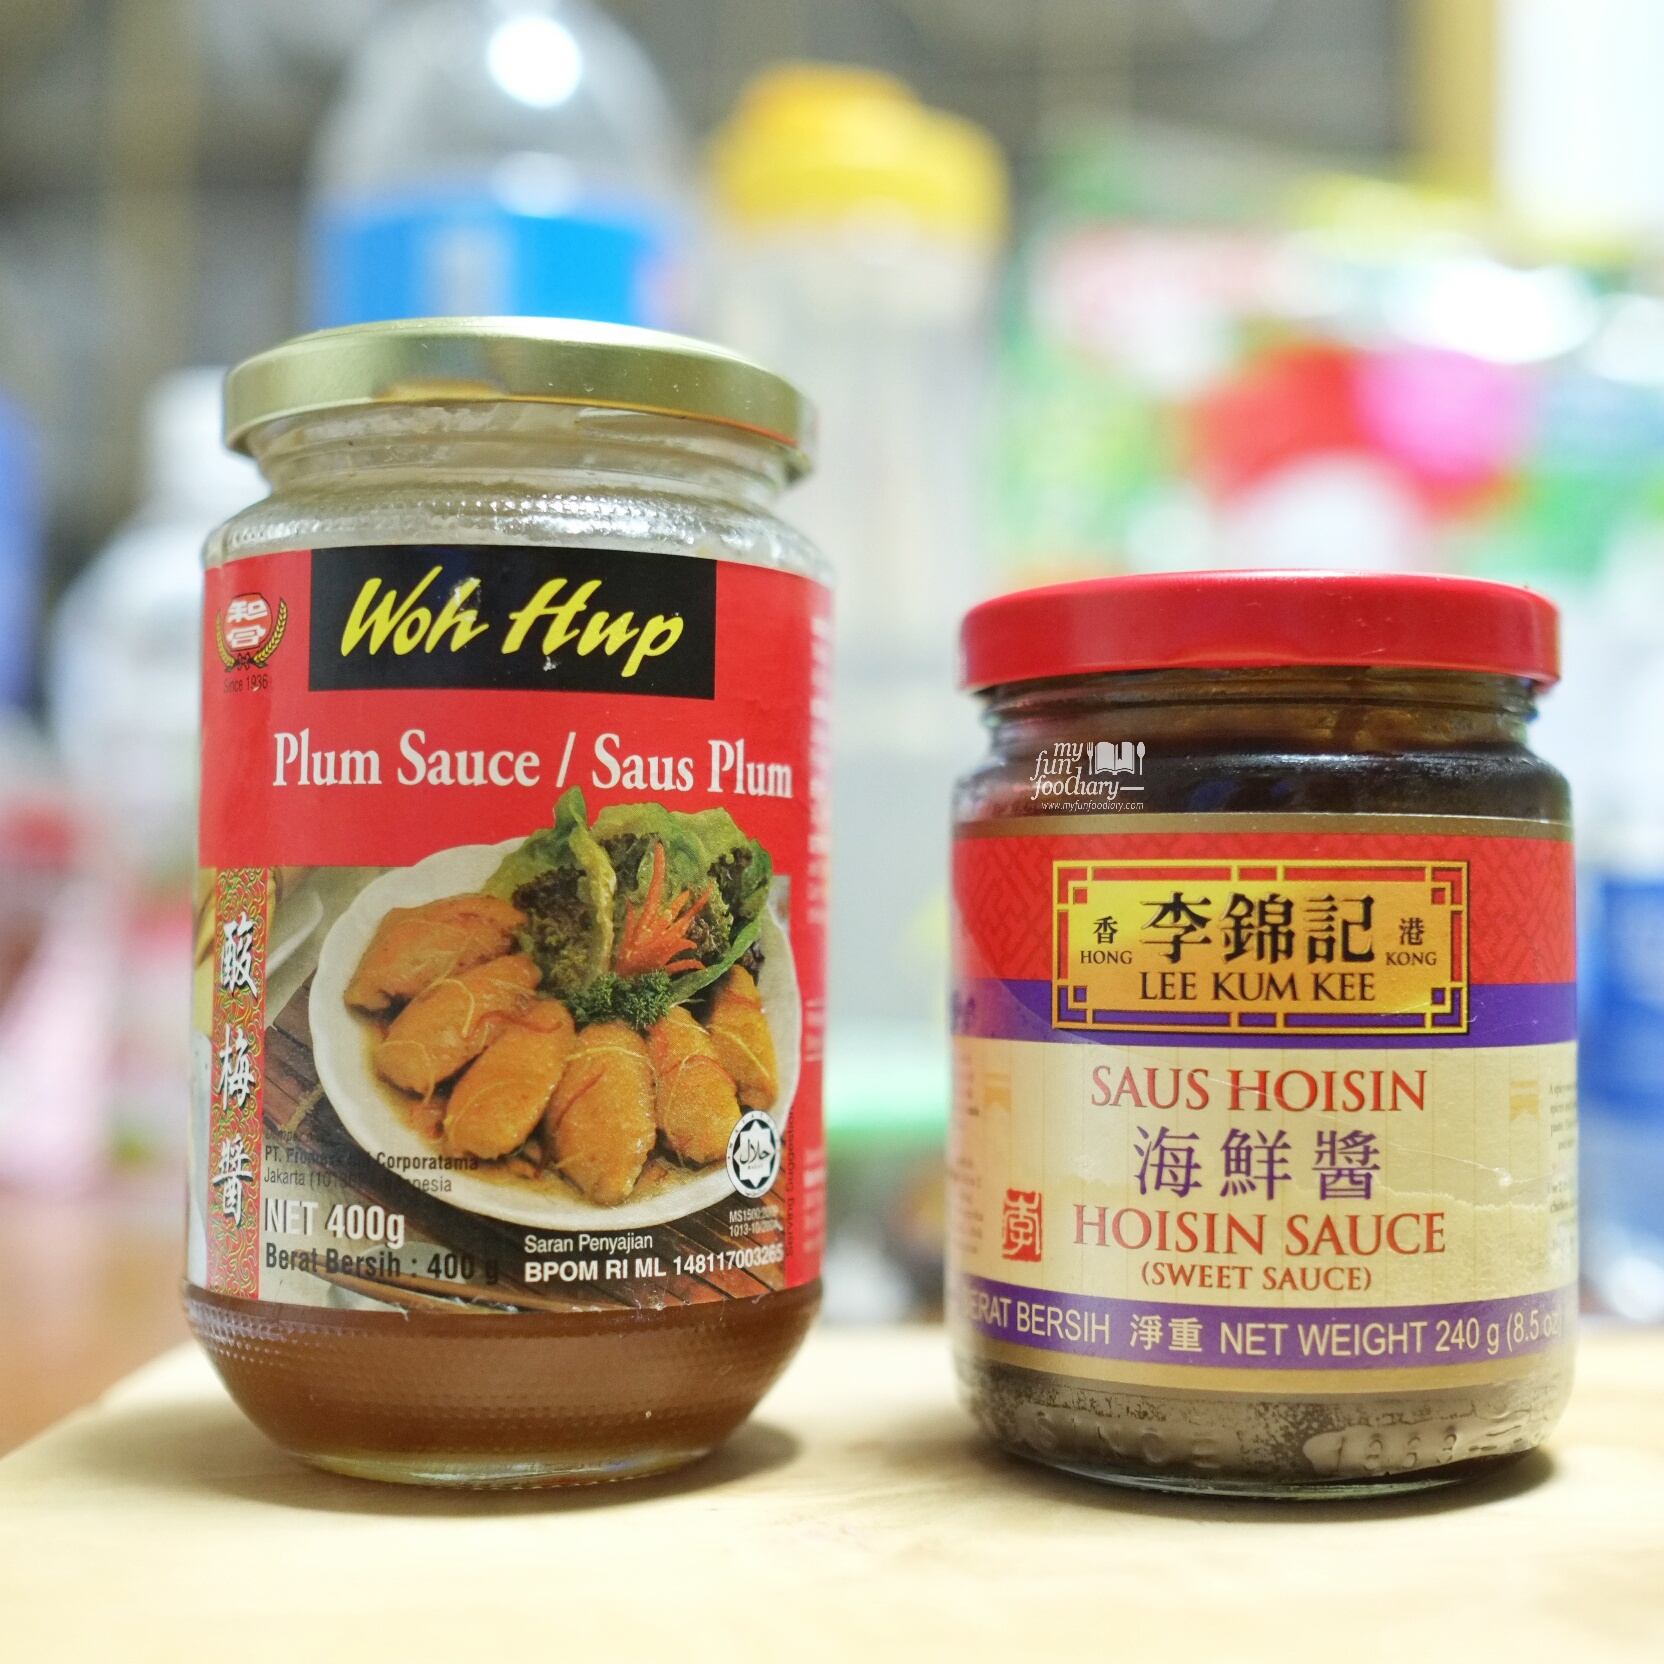 Plum Sauce and Hoisin Sauce at home - by Myfunfoodiary